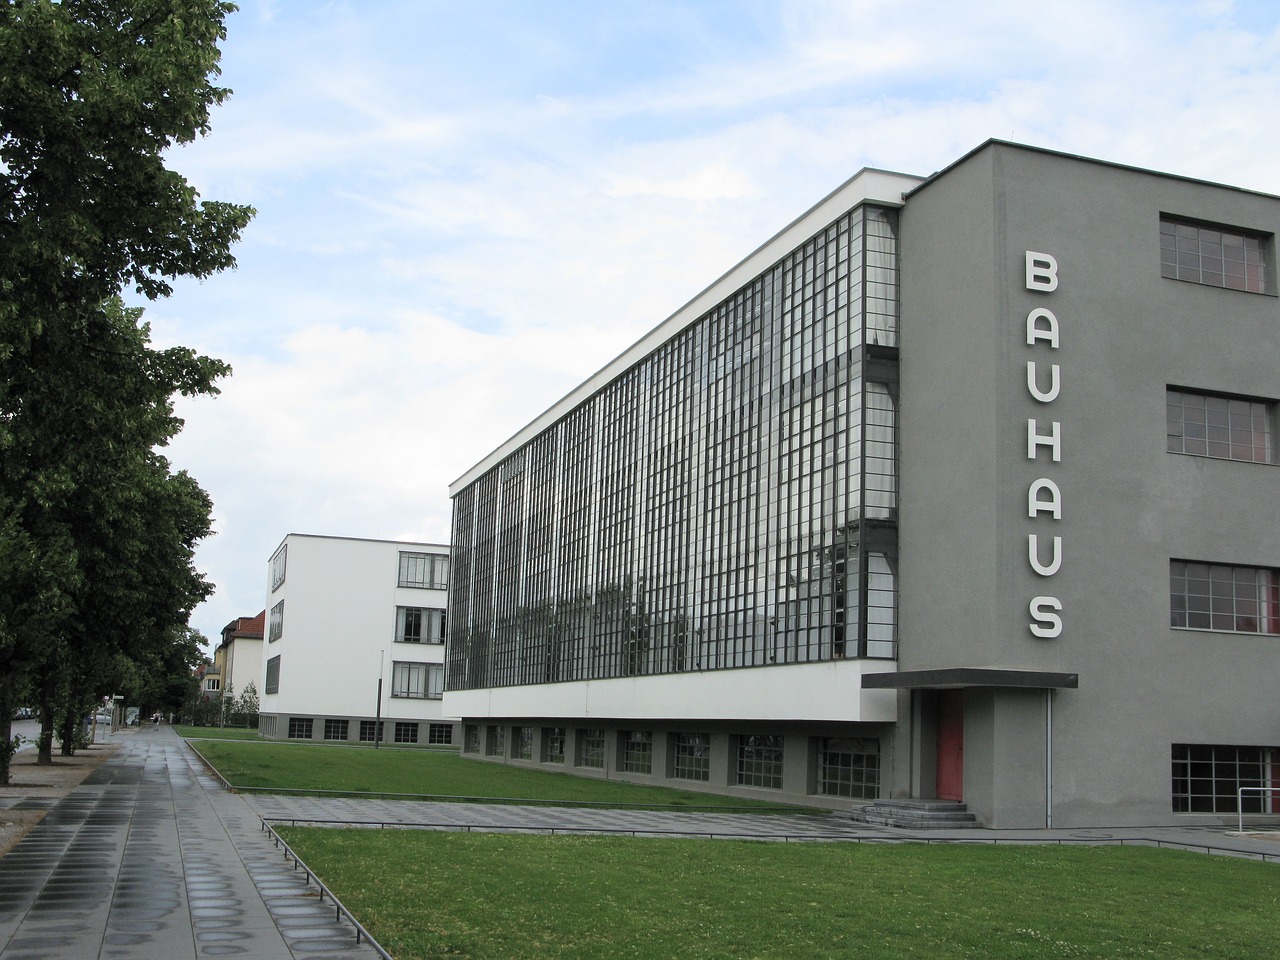 What is Bauhaus Architecture?